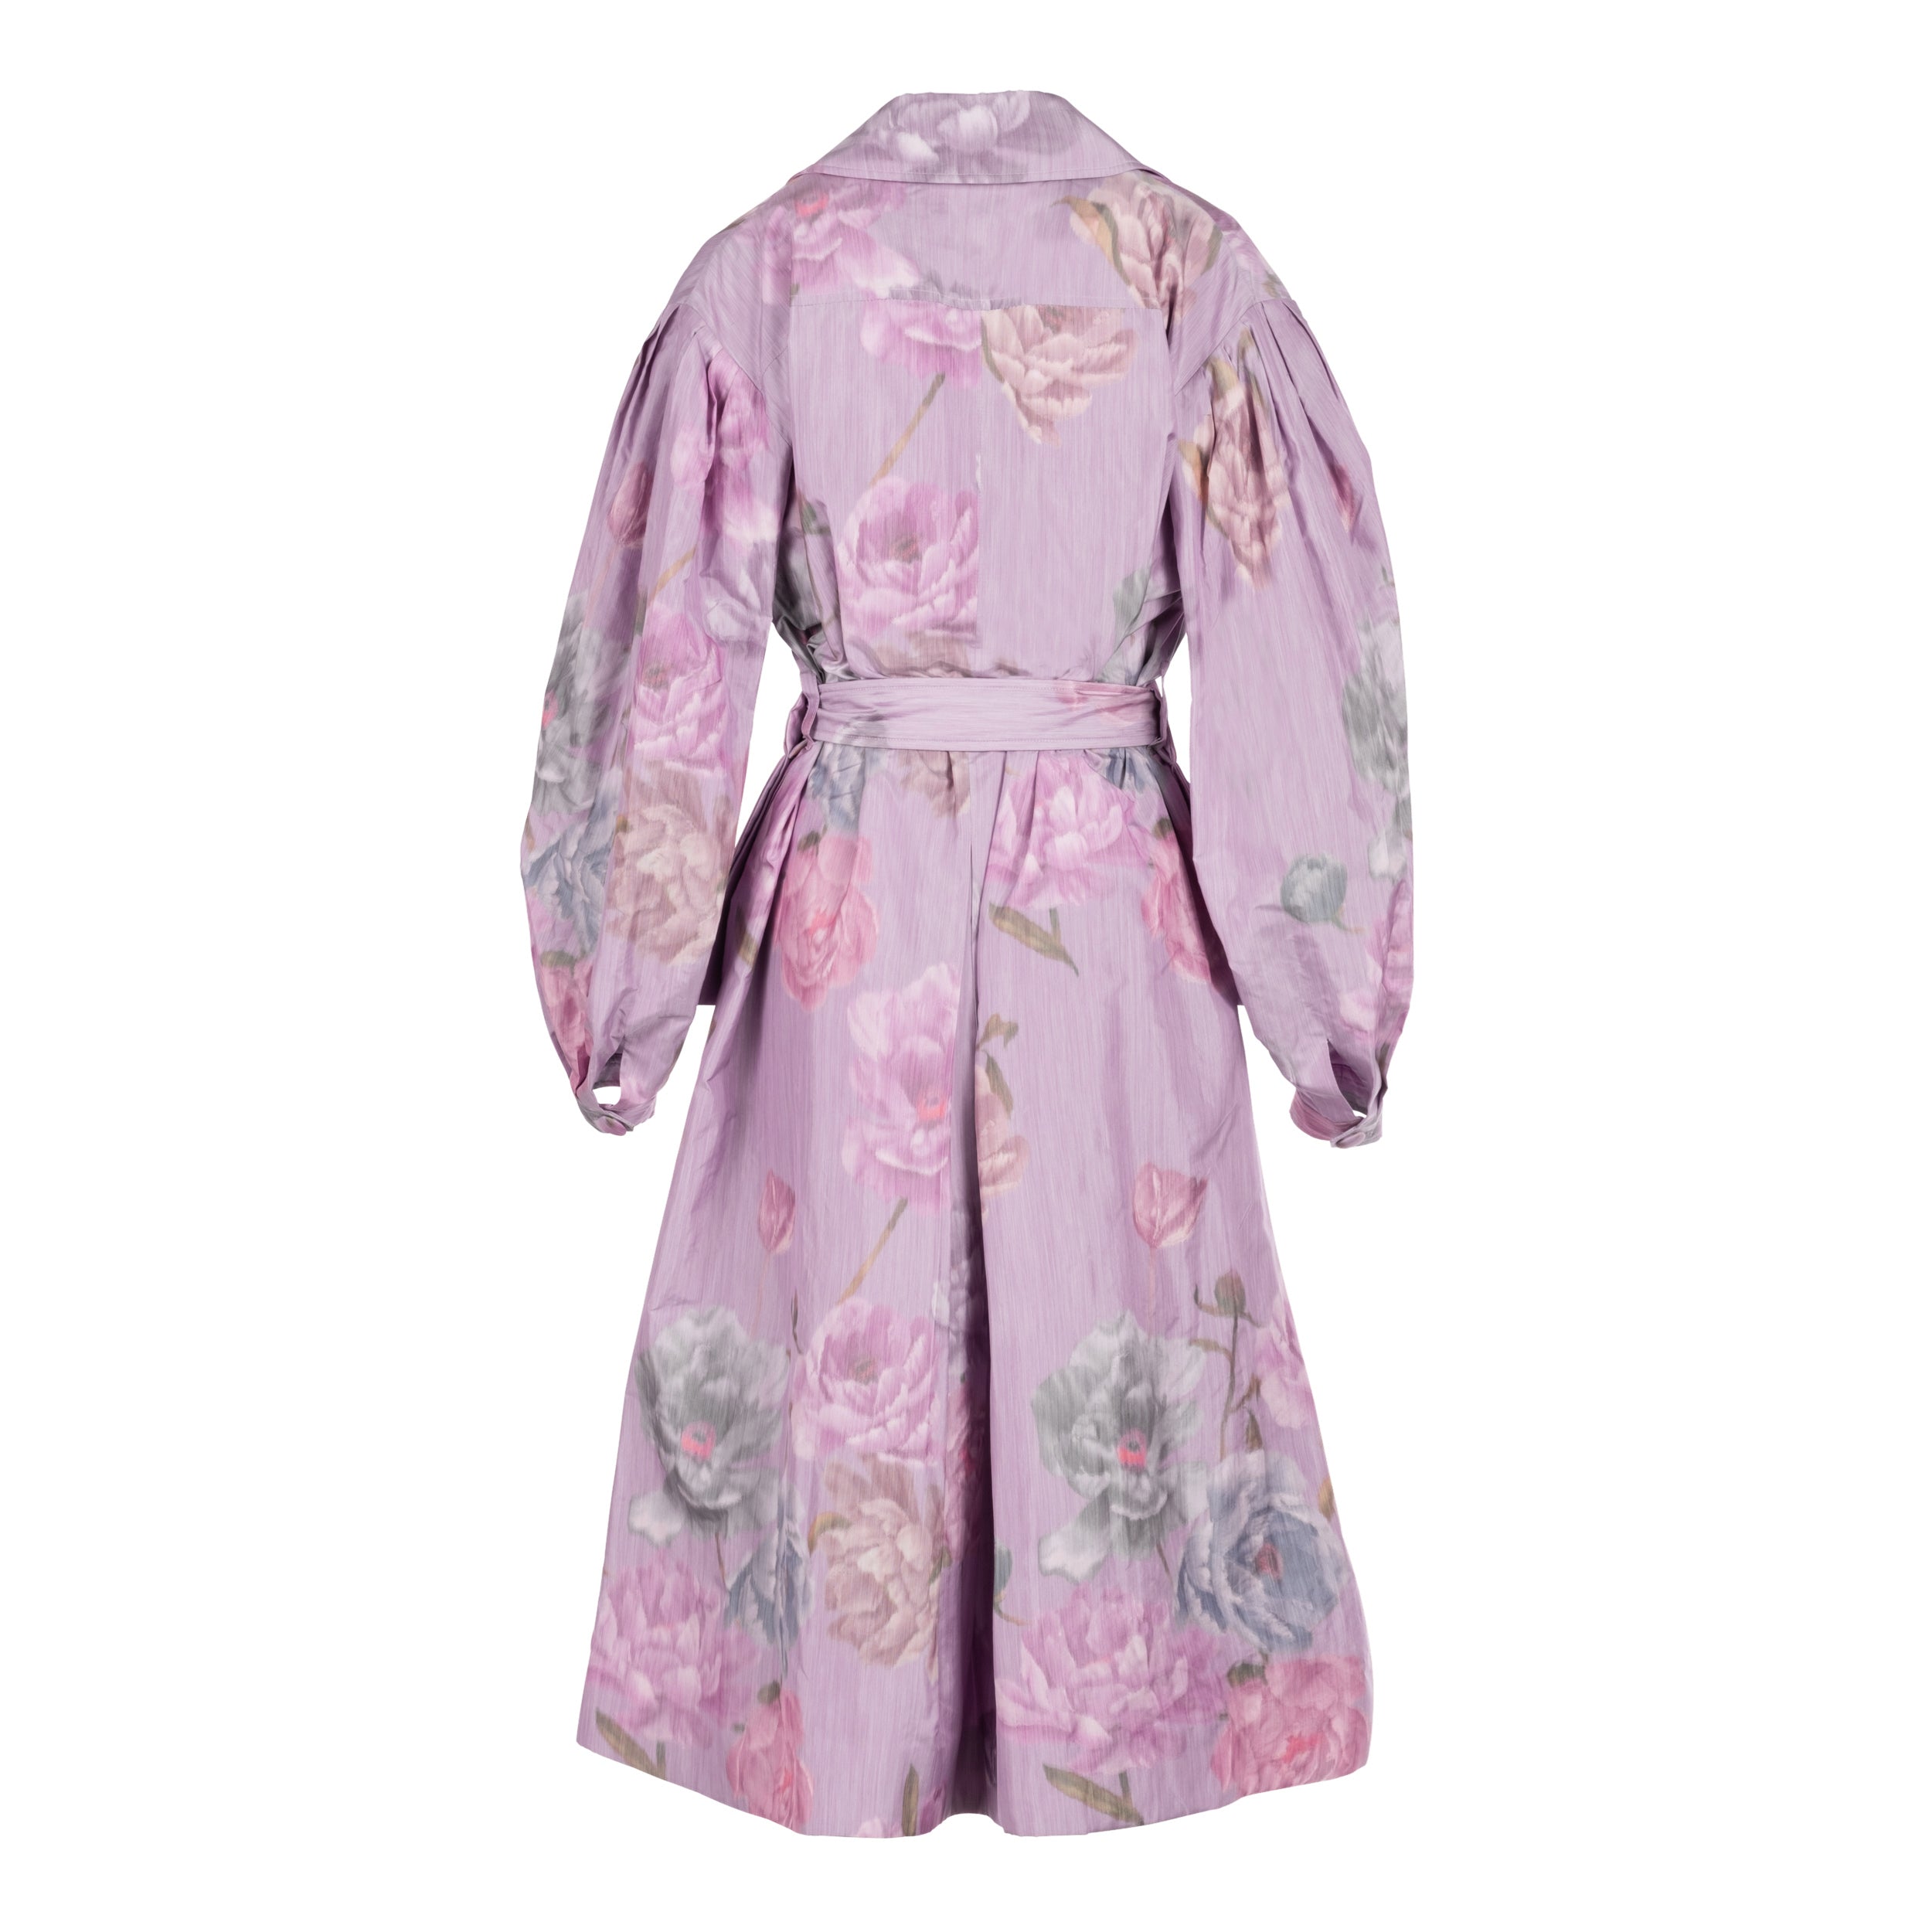 Alexandra Pijut Riding Trench in Lilac Floral Brocade. Oversized trench coat, demi couture. Evening wear.